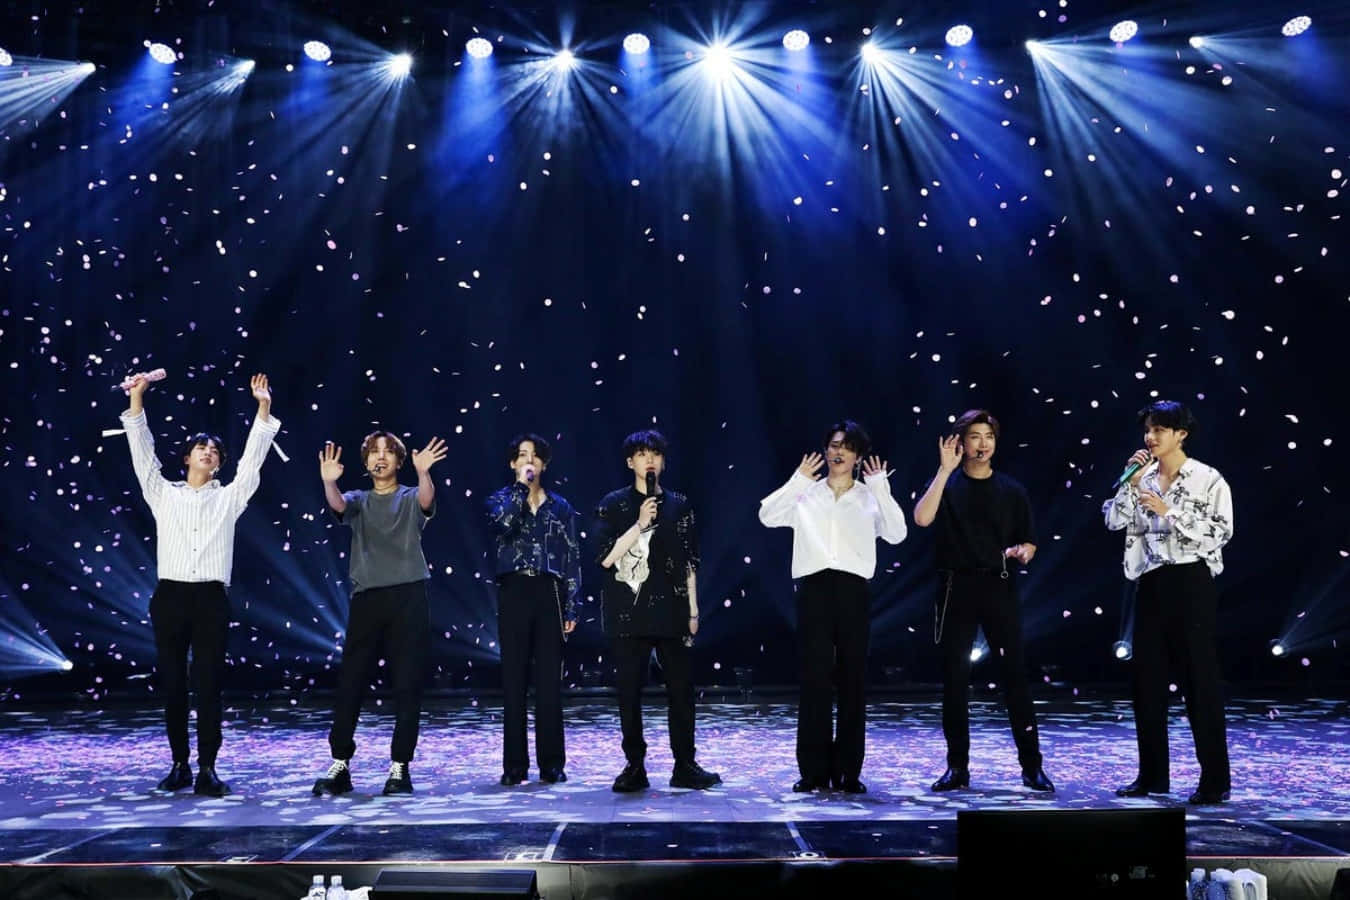 Feel the energy as BTS takes the stage at one of their electrifying concerts